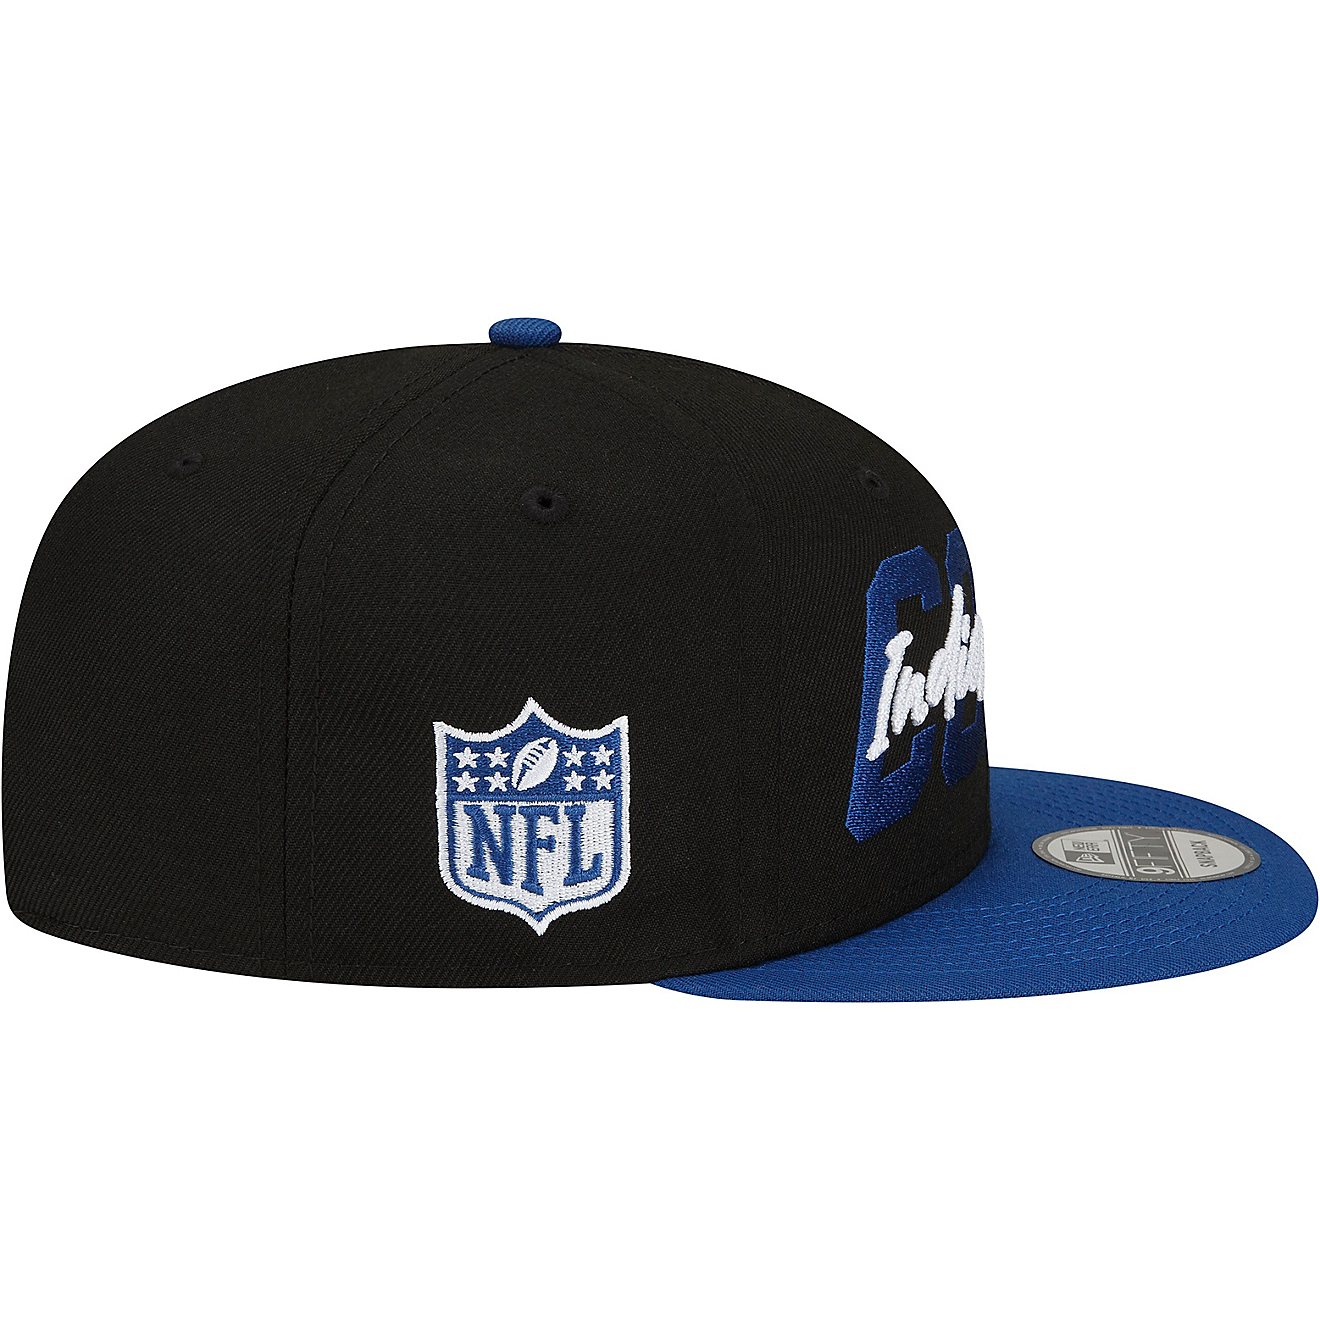 New Era Men's Indianapolis Colts NFL Draft 22 9FIFTY Cap                                                                         - view number 6